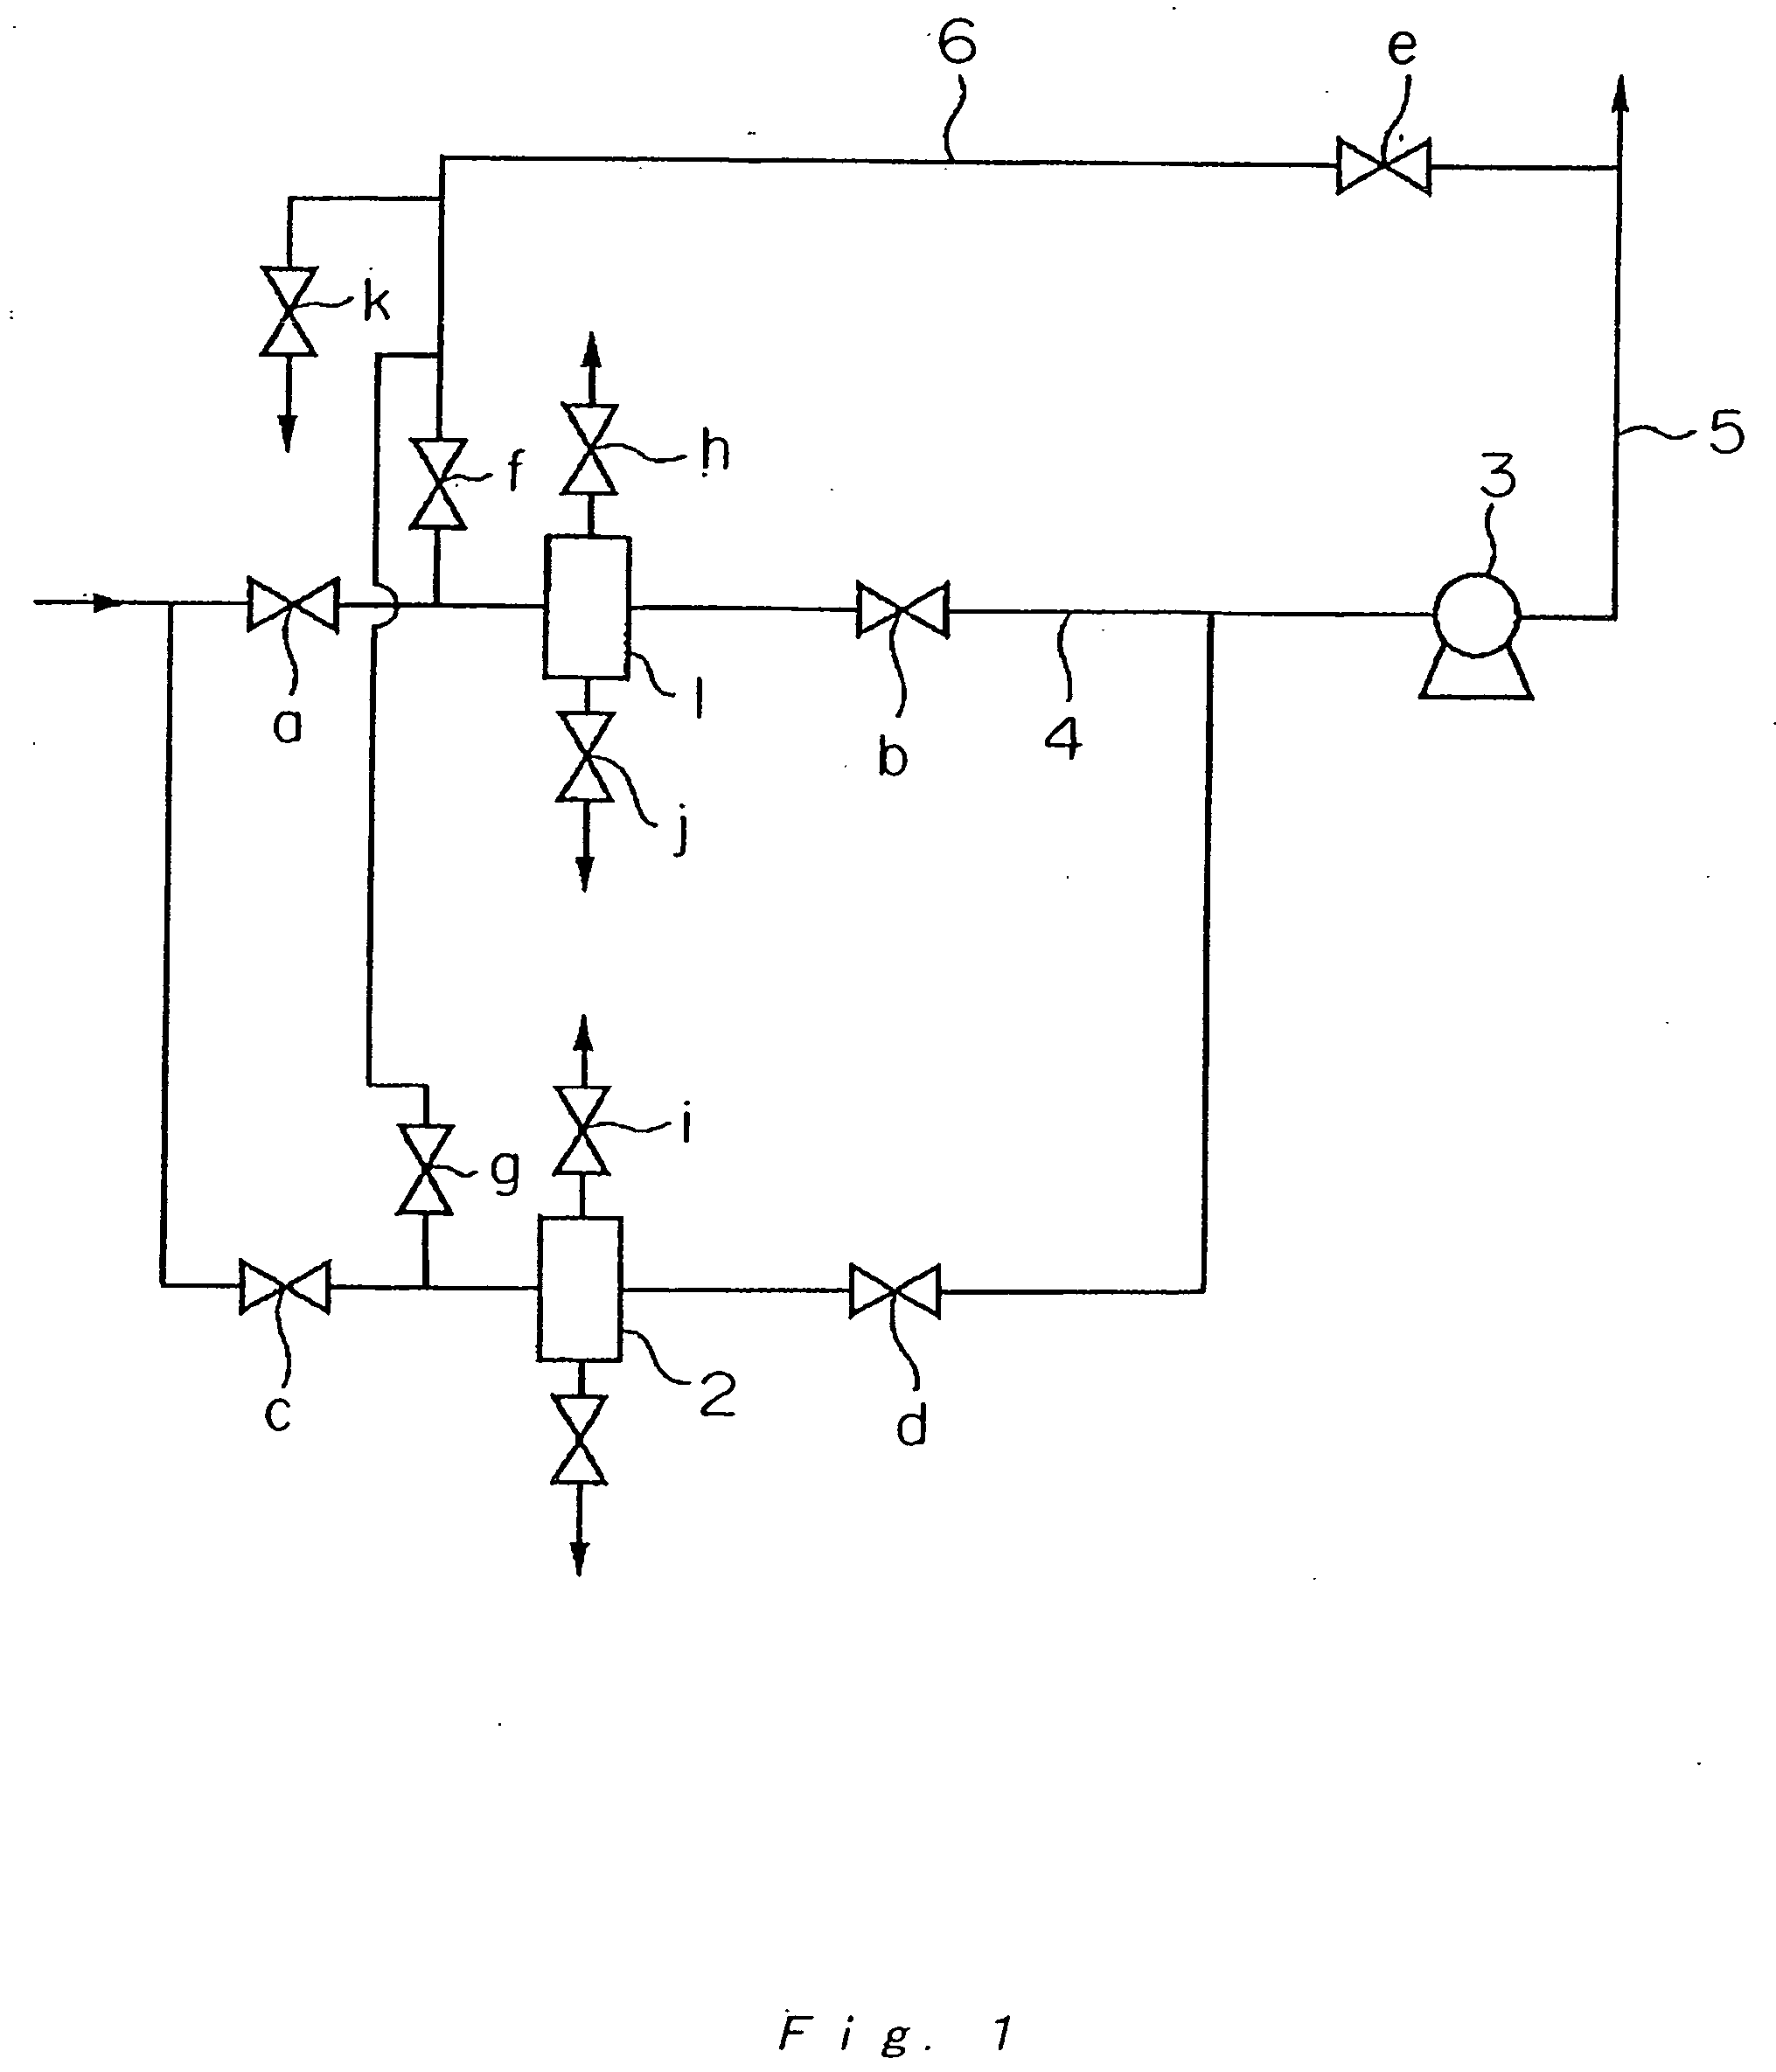 Apparatus and method for handling easily polymerizable substance, apparatus for extracting liquid from apparatus under reduced pressure, and process for producing easily polymerizable substance